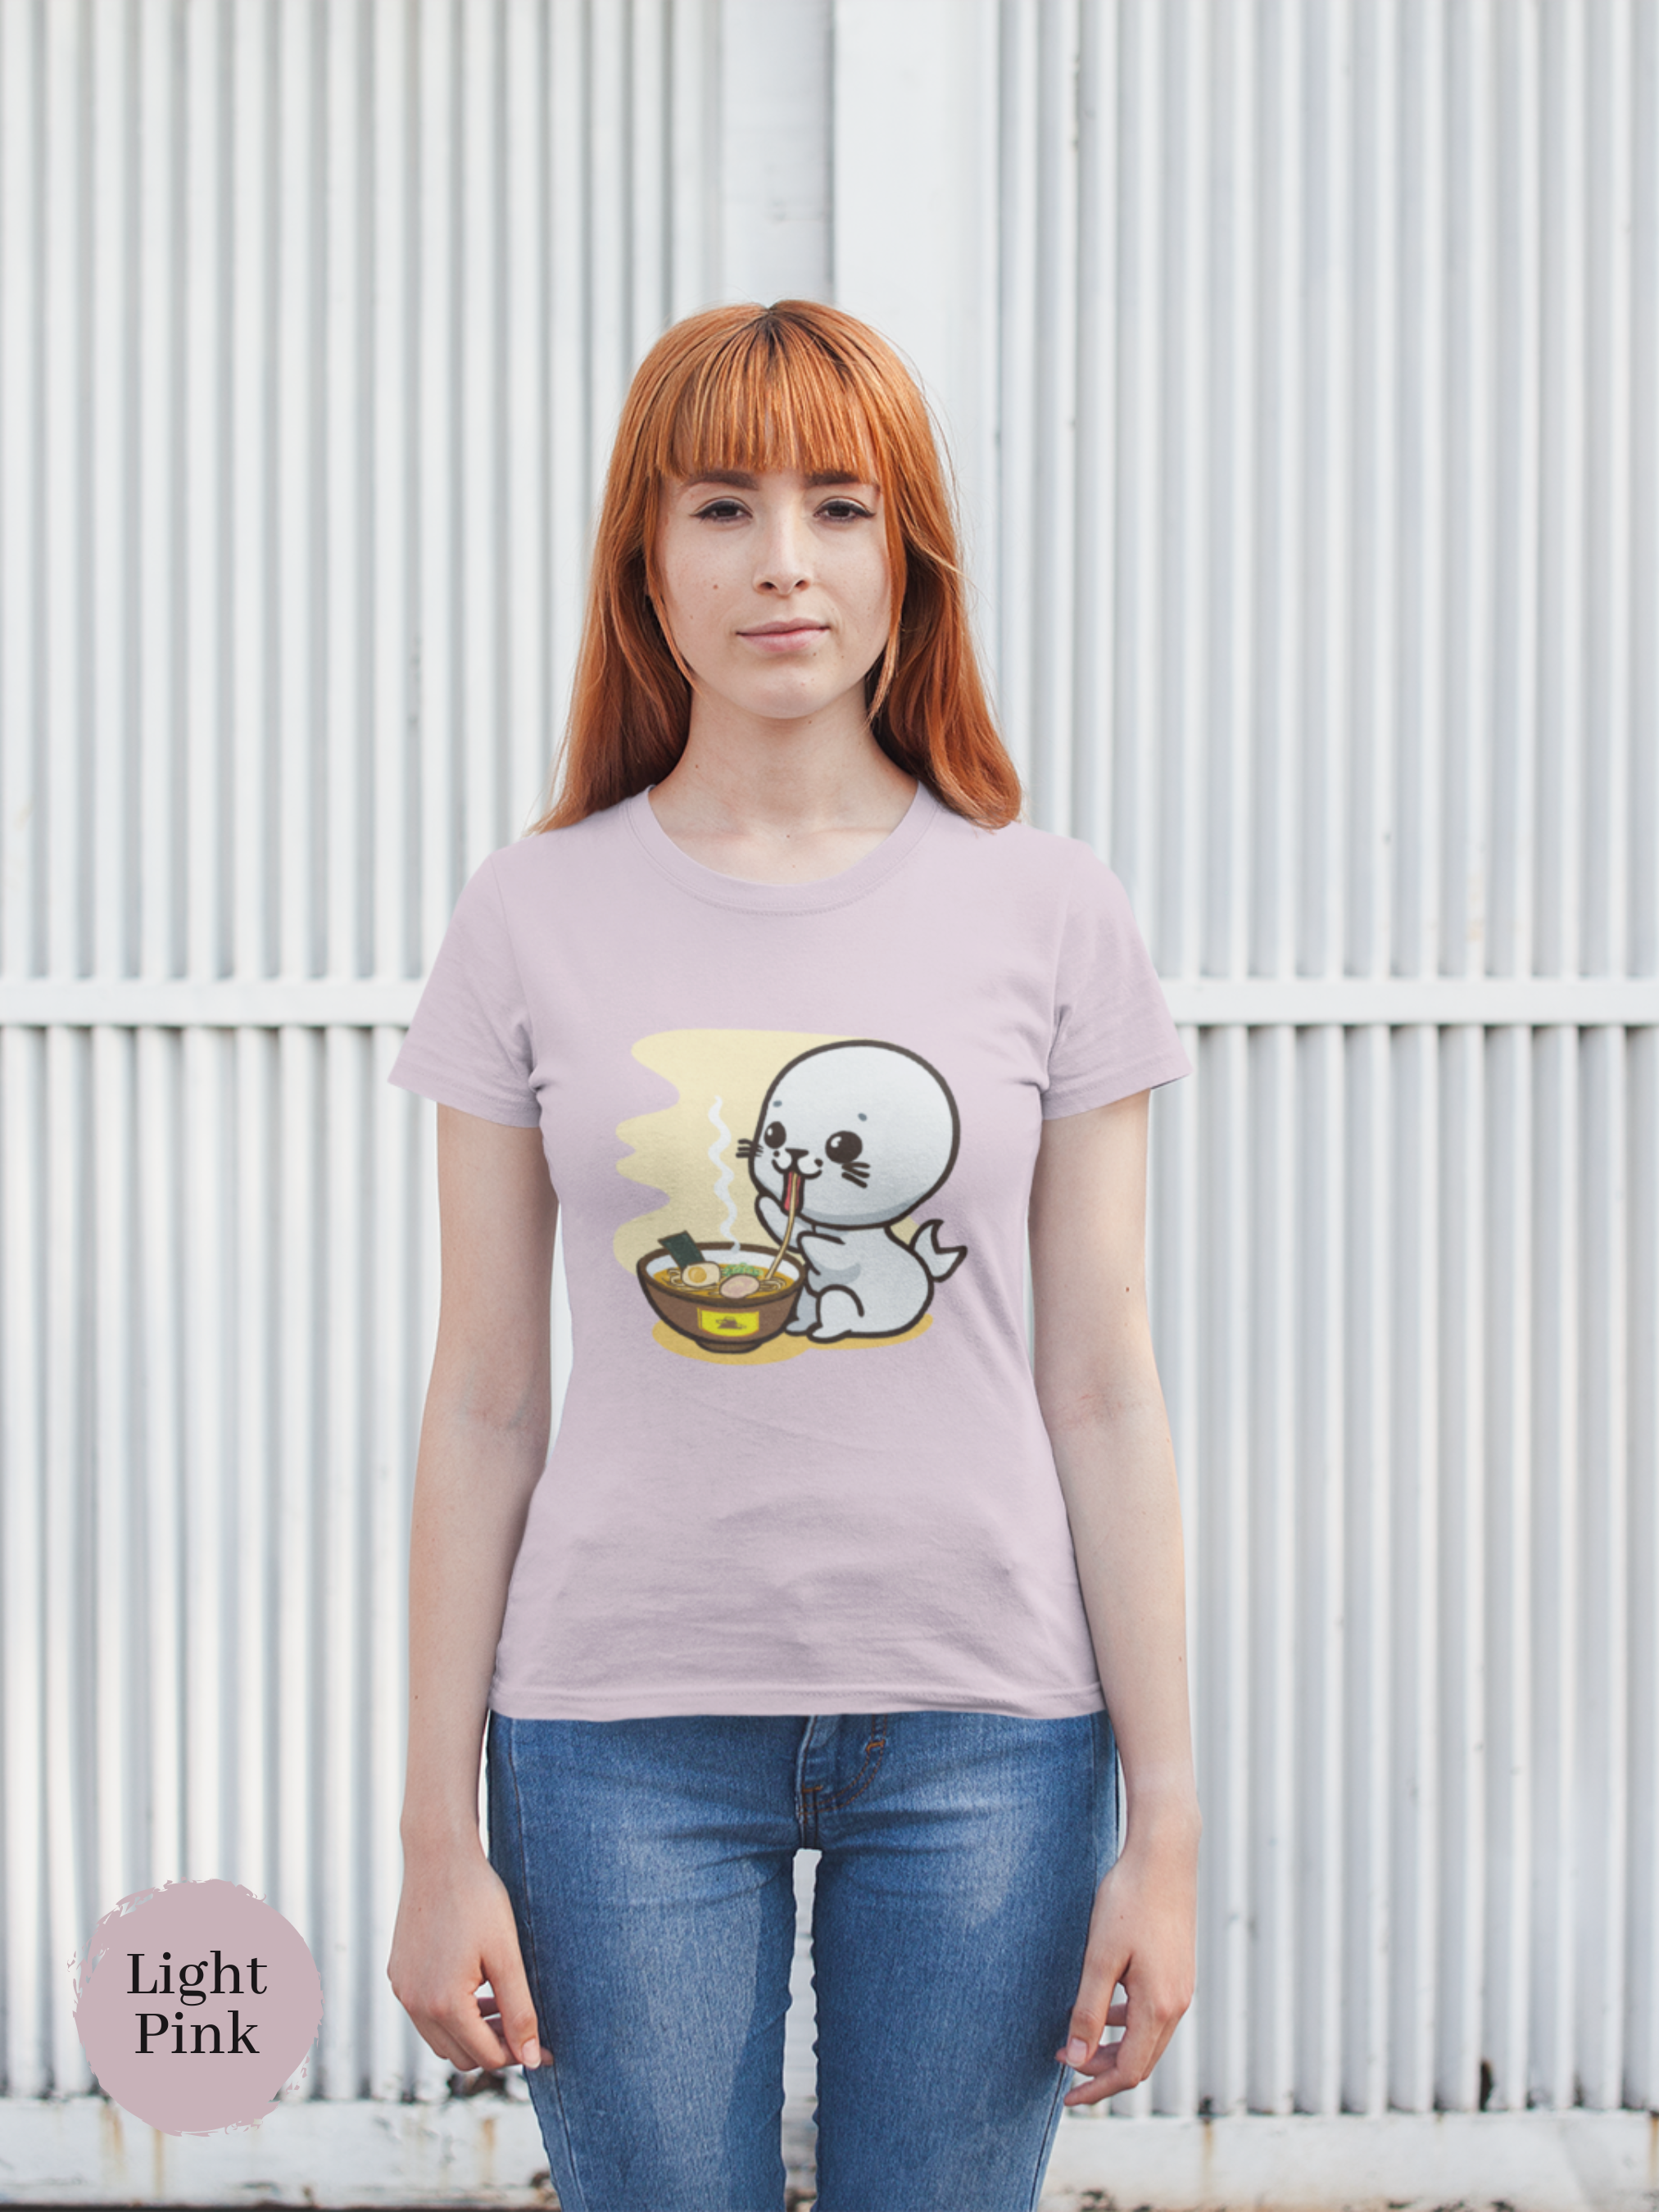 Ramen T-shirt with Adorable Baby Seal: A Unique Japanese Foodie Shirt with Ramen Art